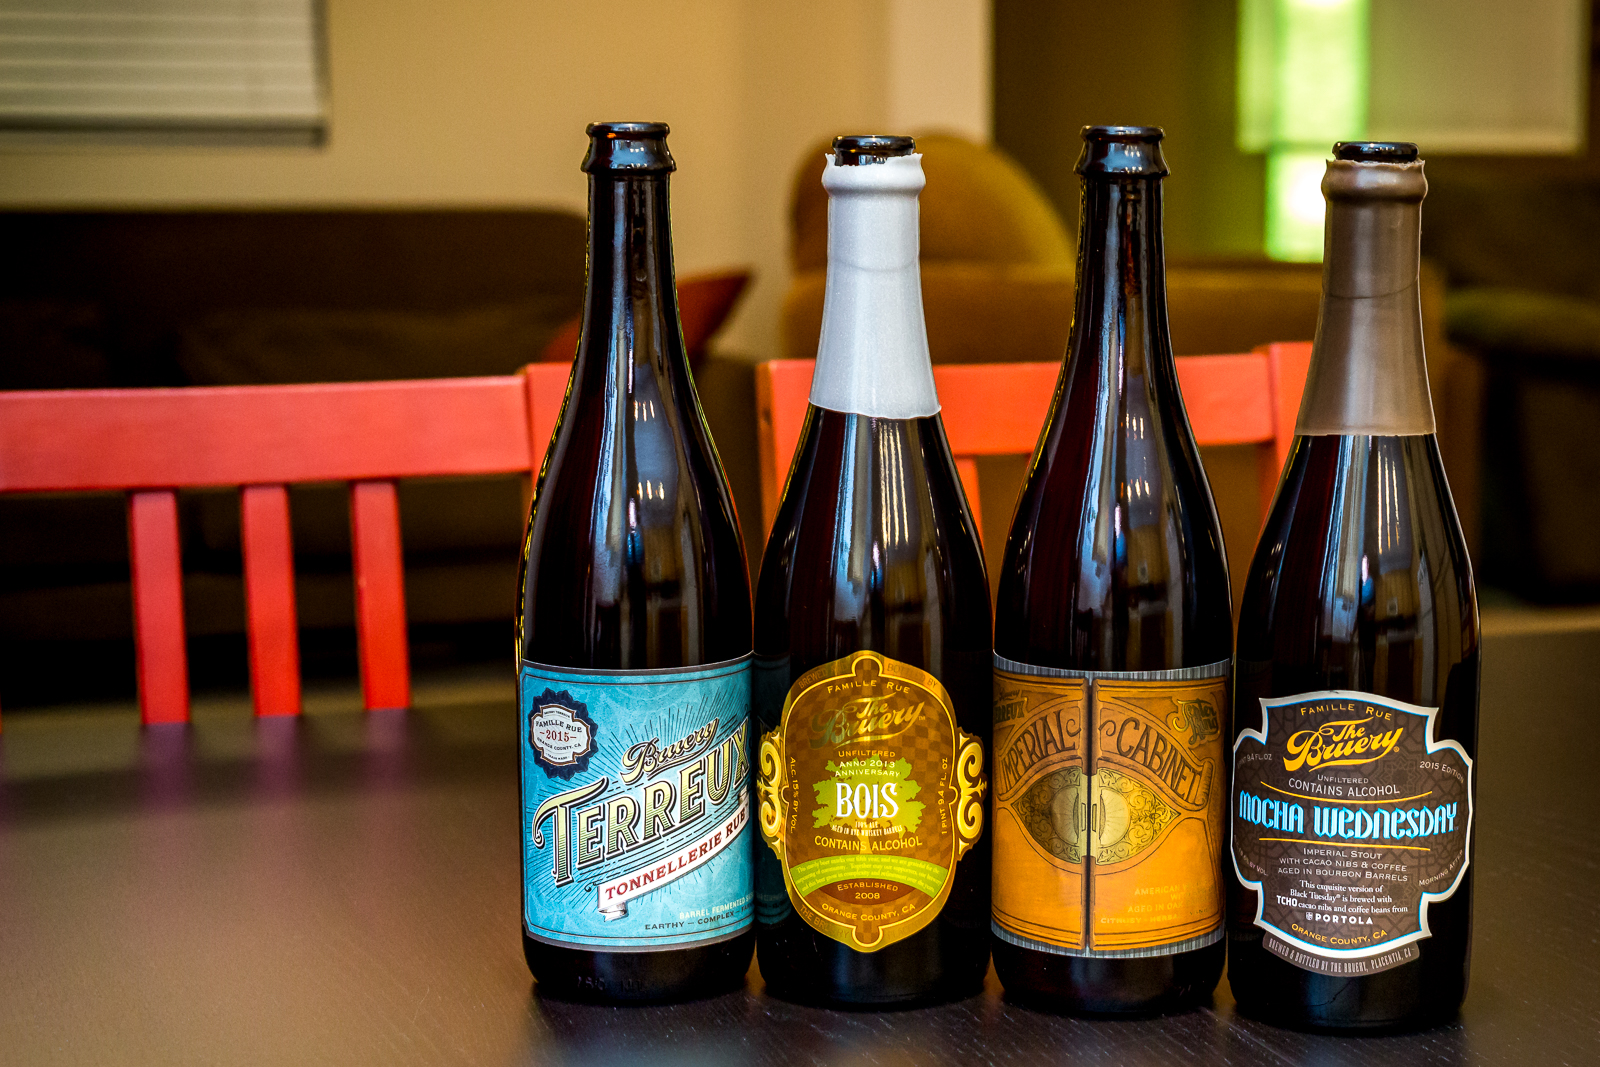 Beers from The Bruery and Bruery Terreux